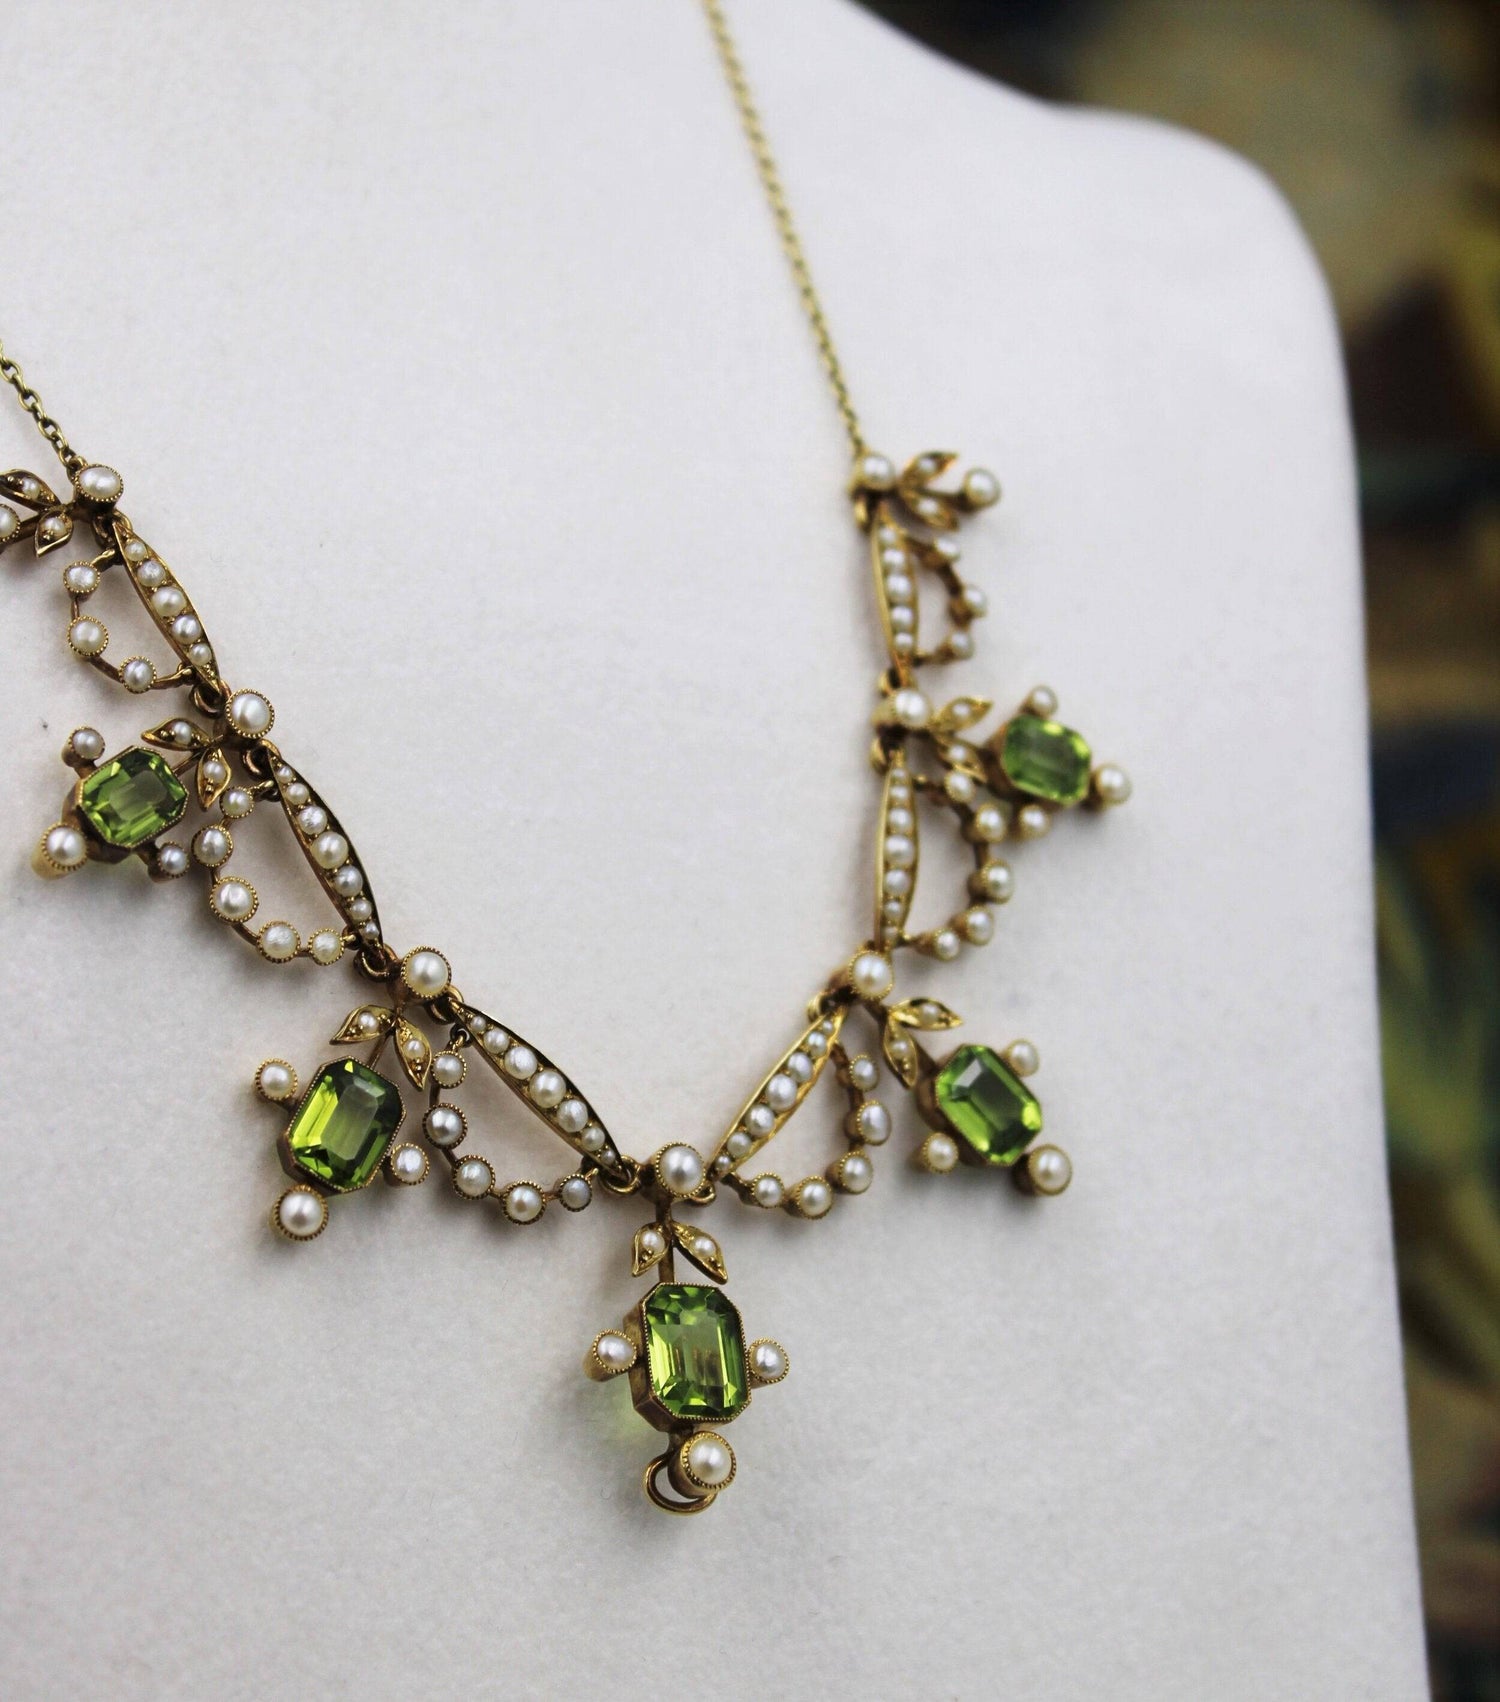 An exquisite Peridot & Seed Pearl Festoon Necklace with a matching Quatrefoil style detachable Pendant/Brooch in 15 Carat Yellow Gold, English, Circa 1900 - Robin Haydock Antiques